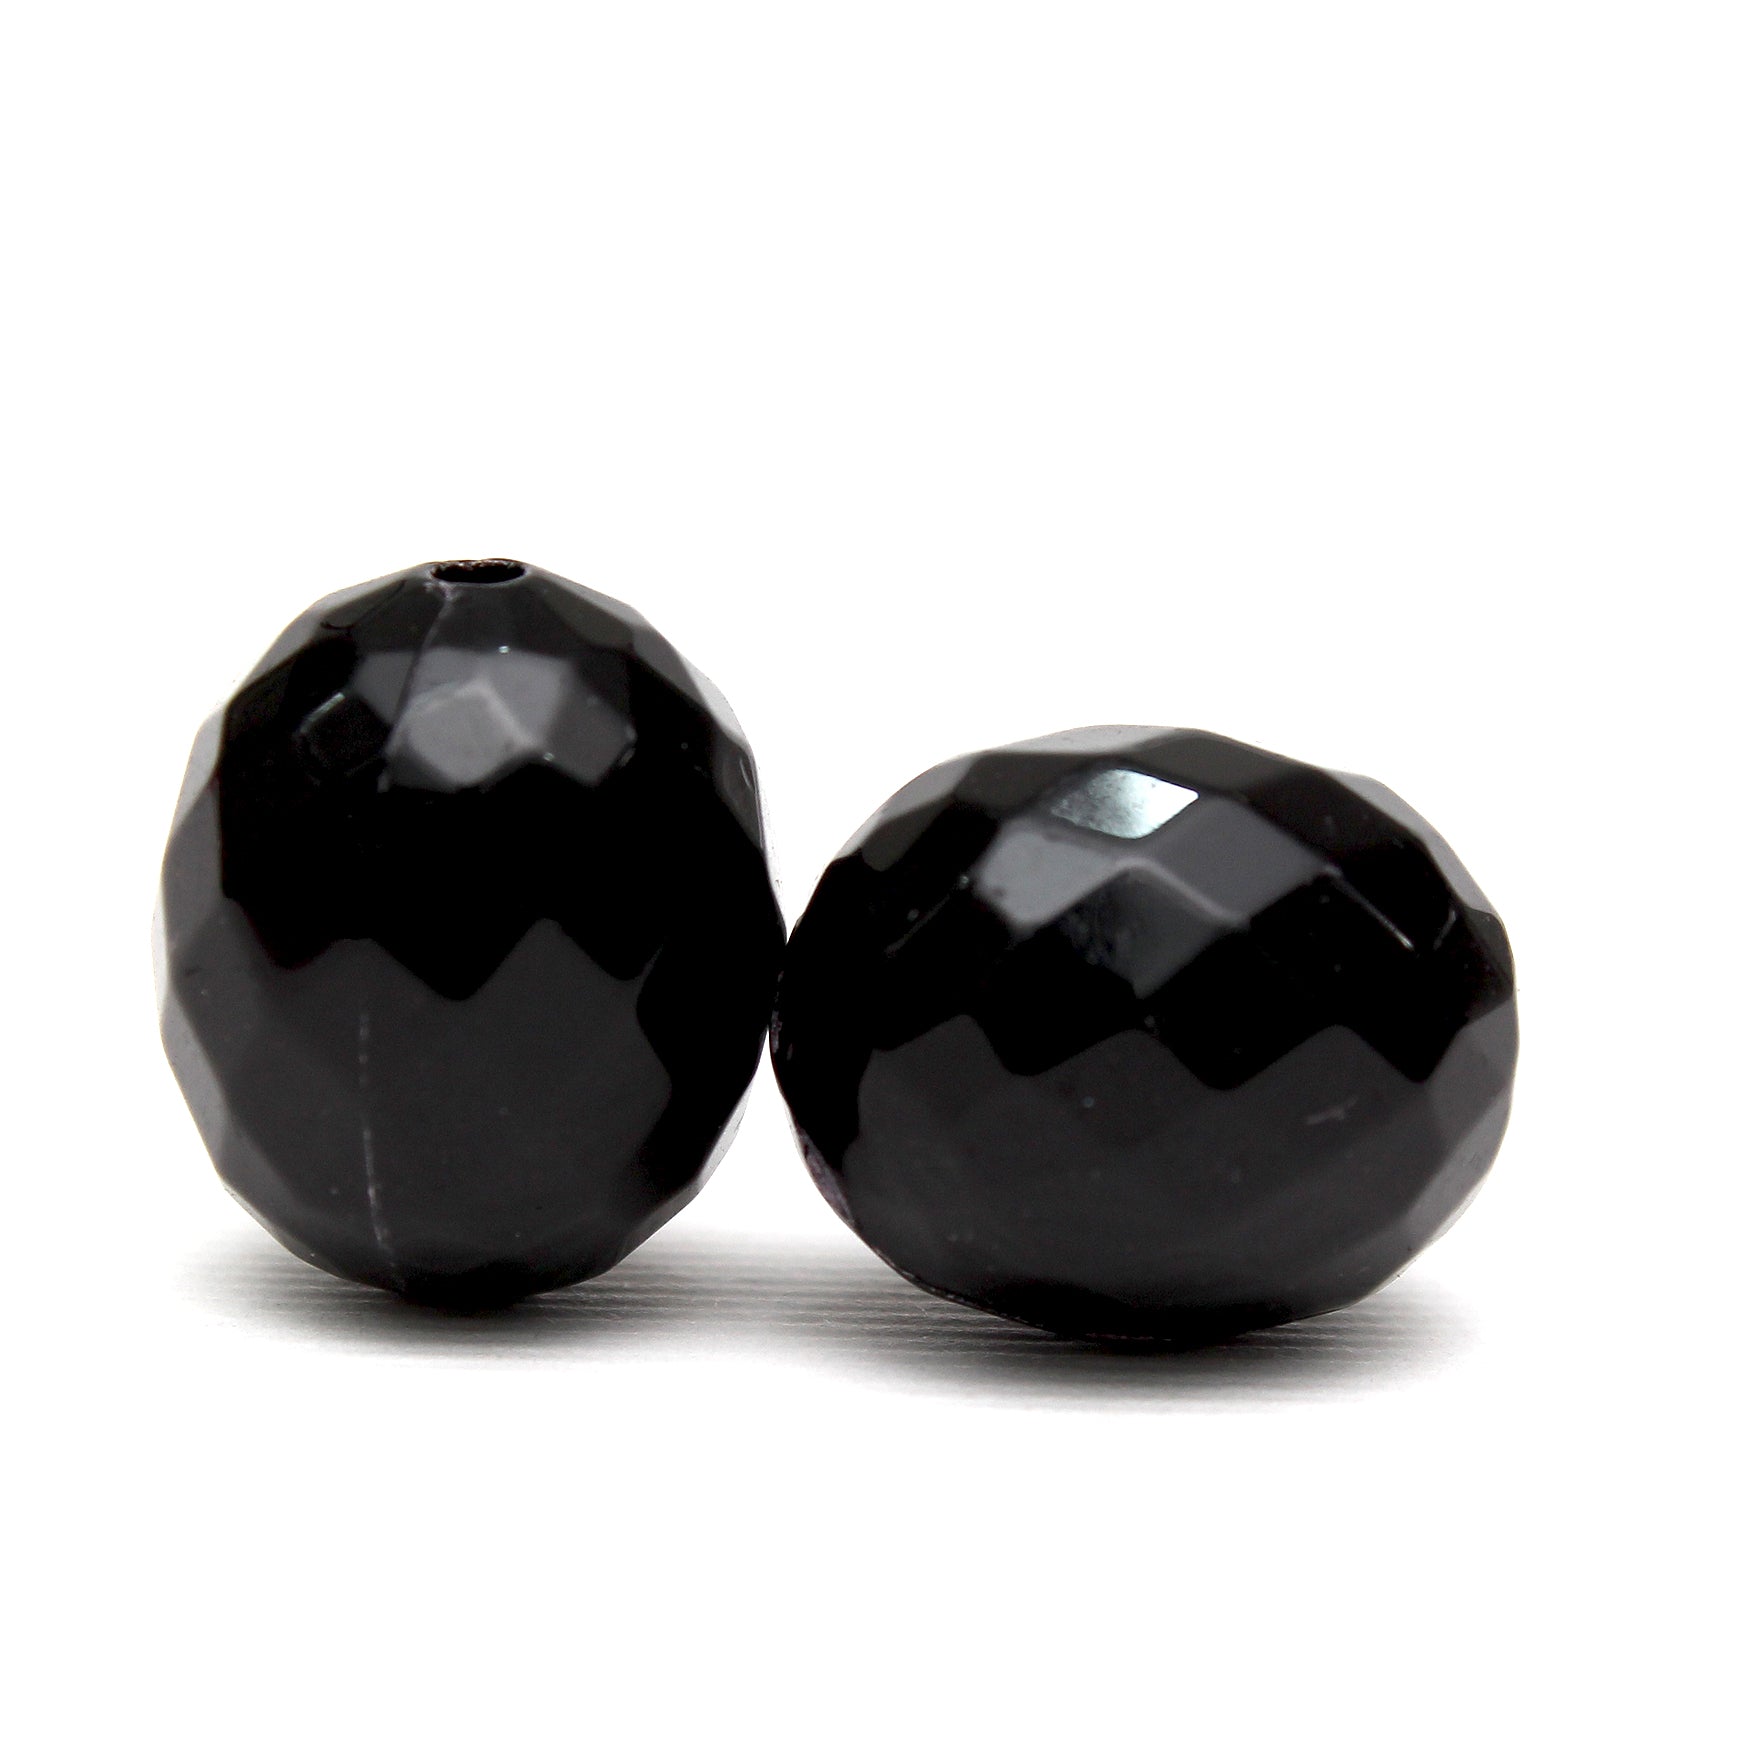 Beads Glossy Black Faceted Oval 15Mm X 13Mm 30G Pb Ib